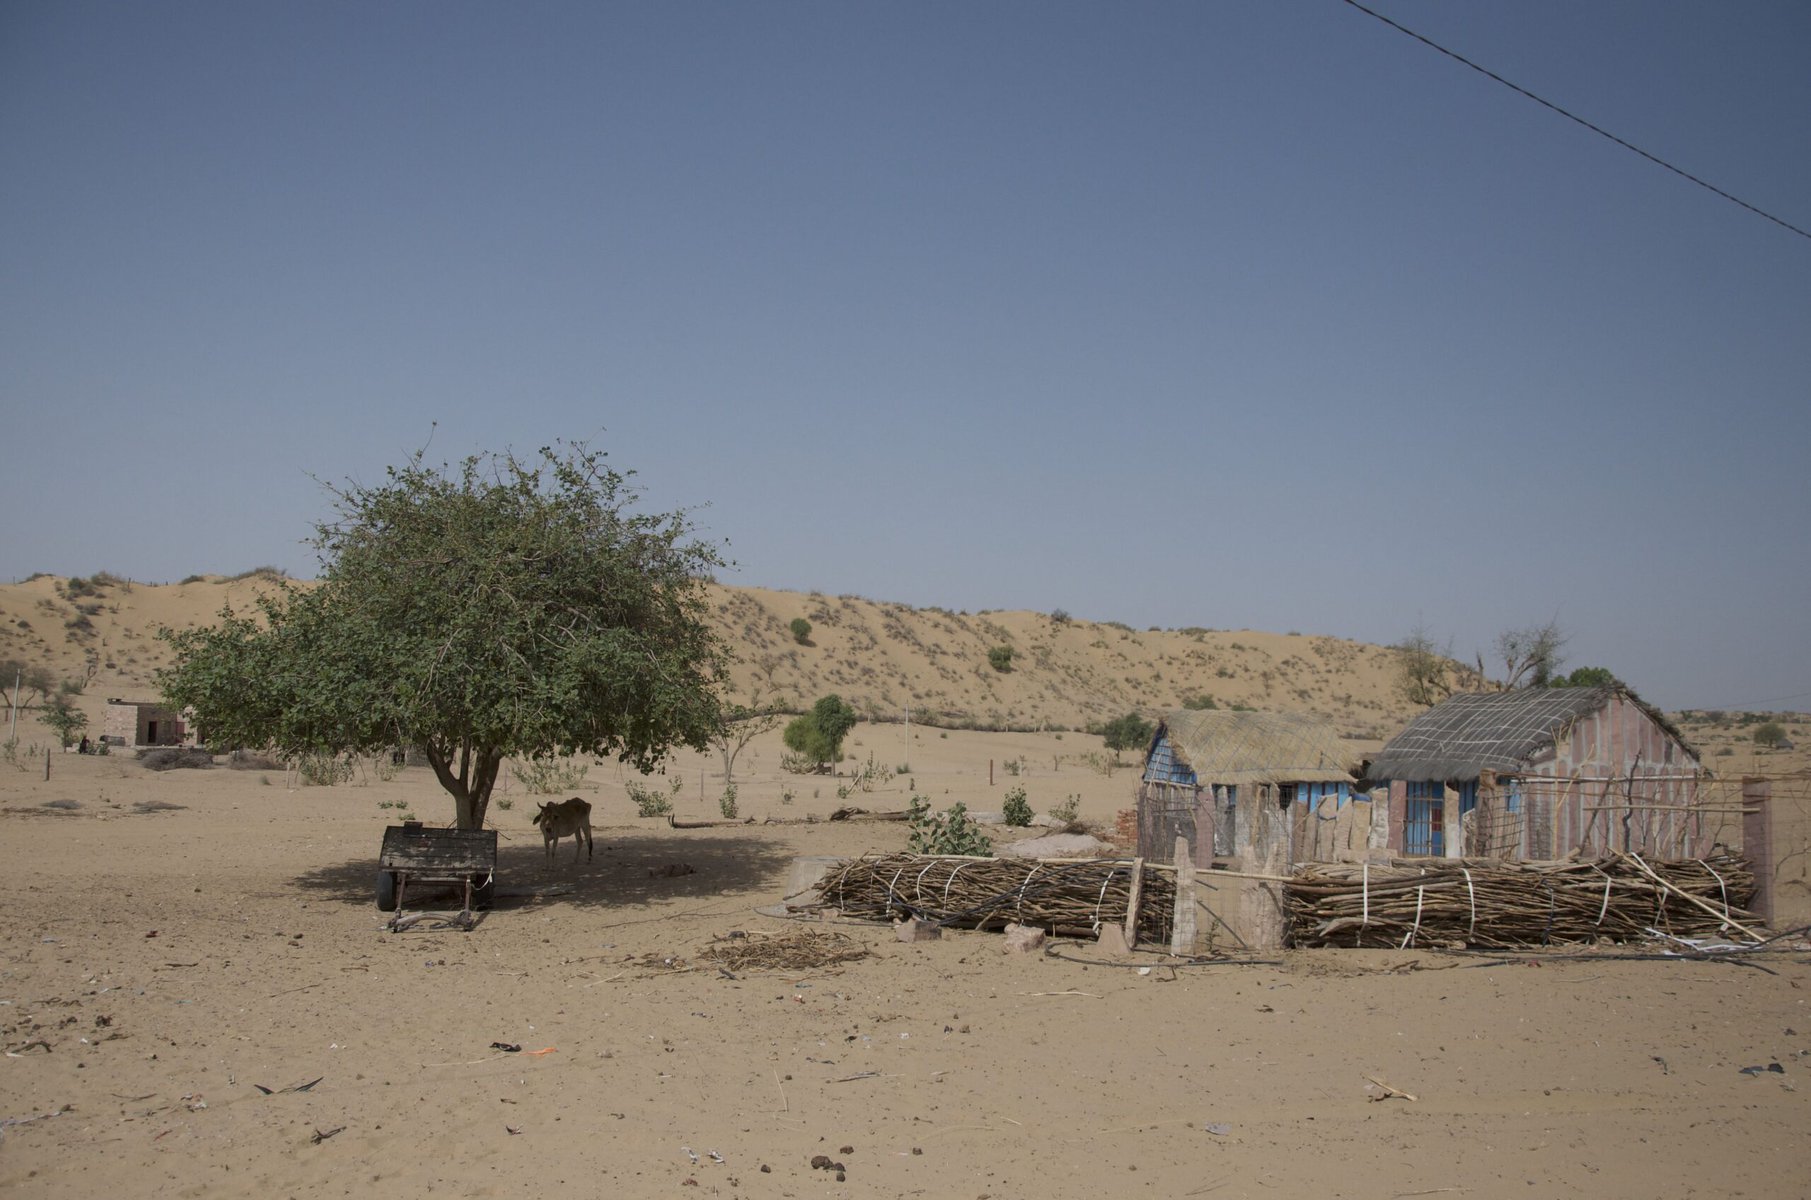 A village in the Thar desert with sparse vegetation